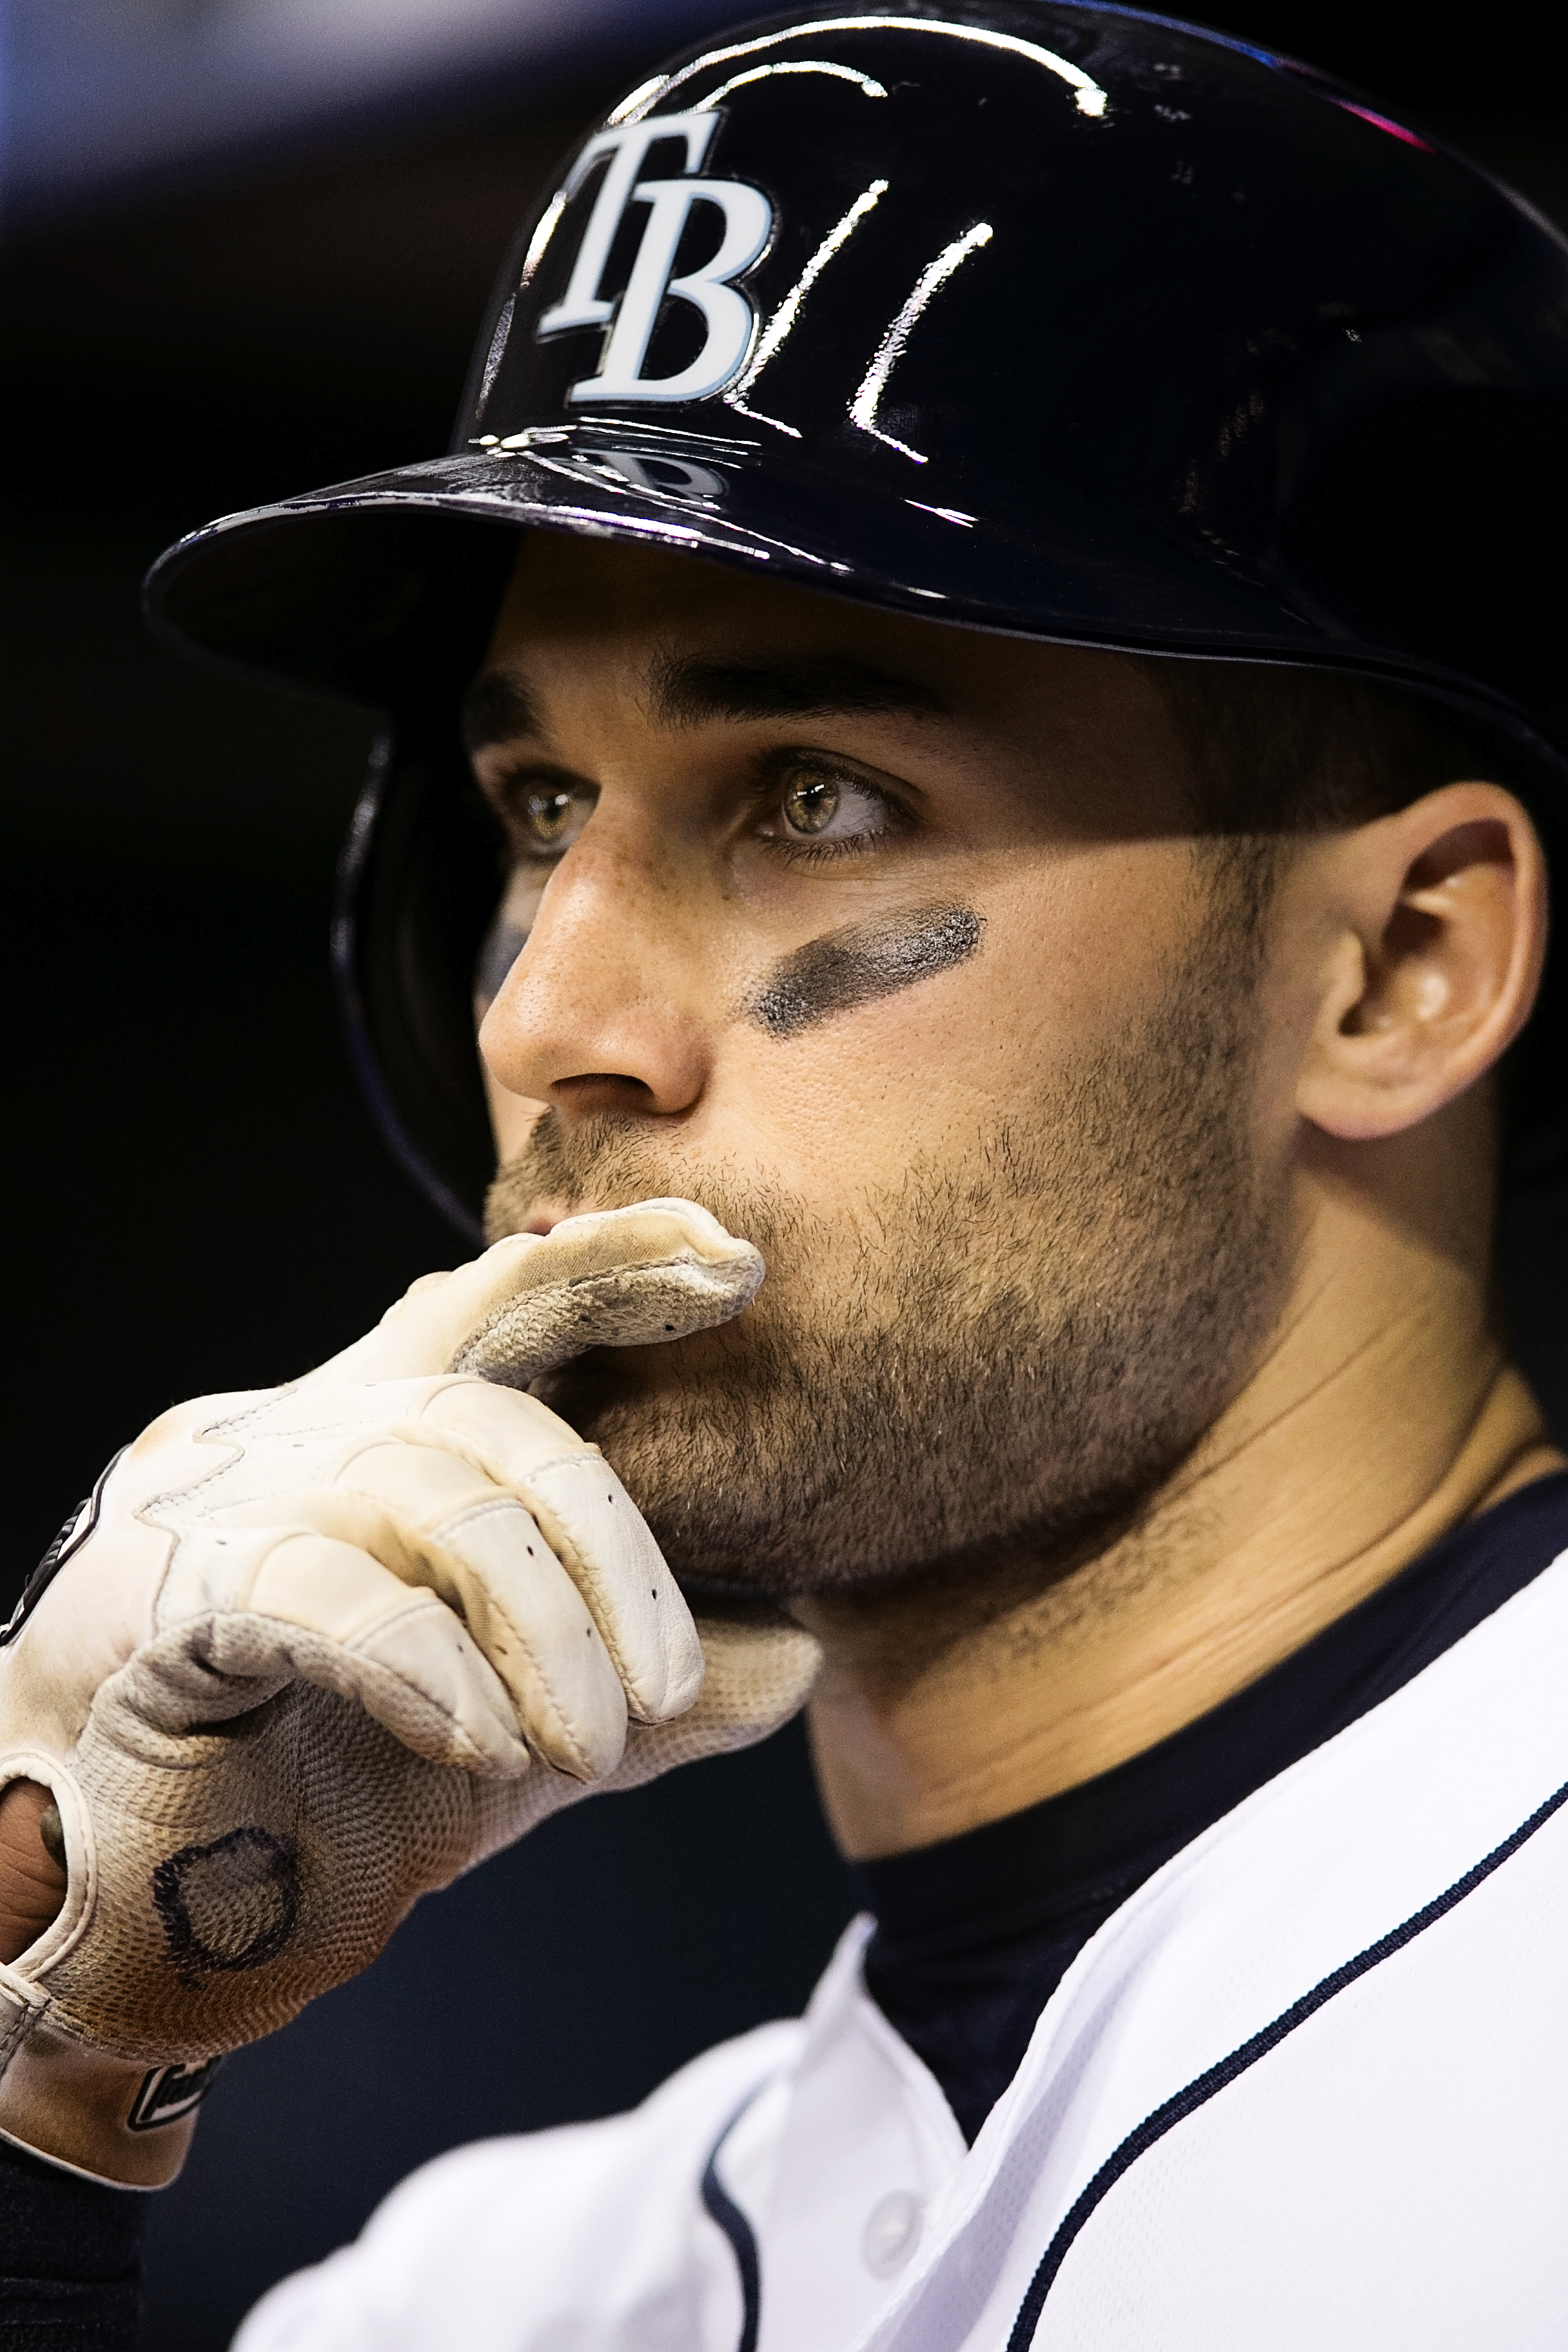 The Rays face the next two months without Kiermaier./CARMEN MANDATO